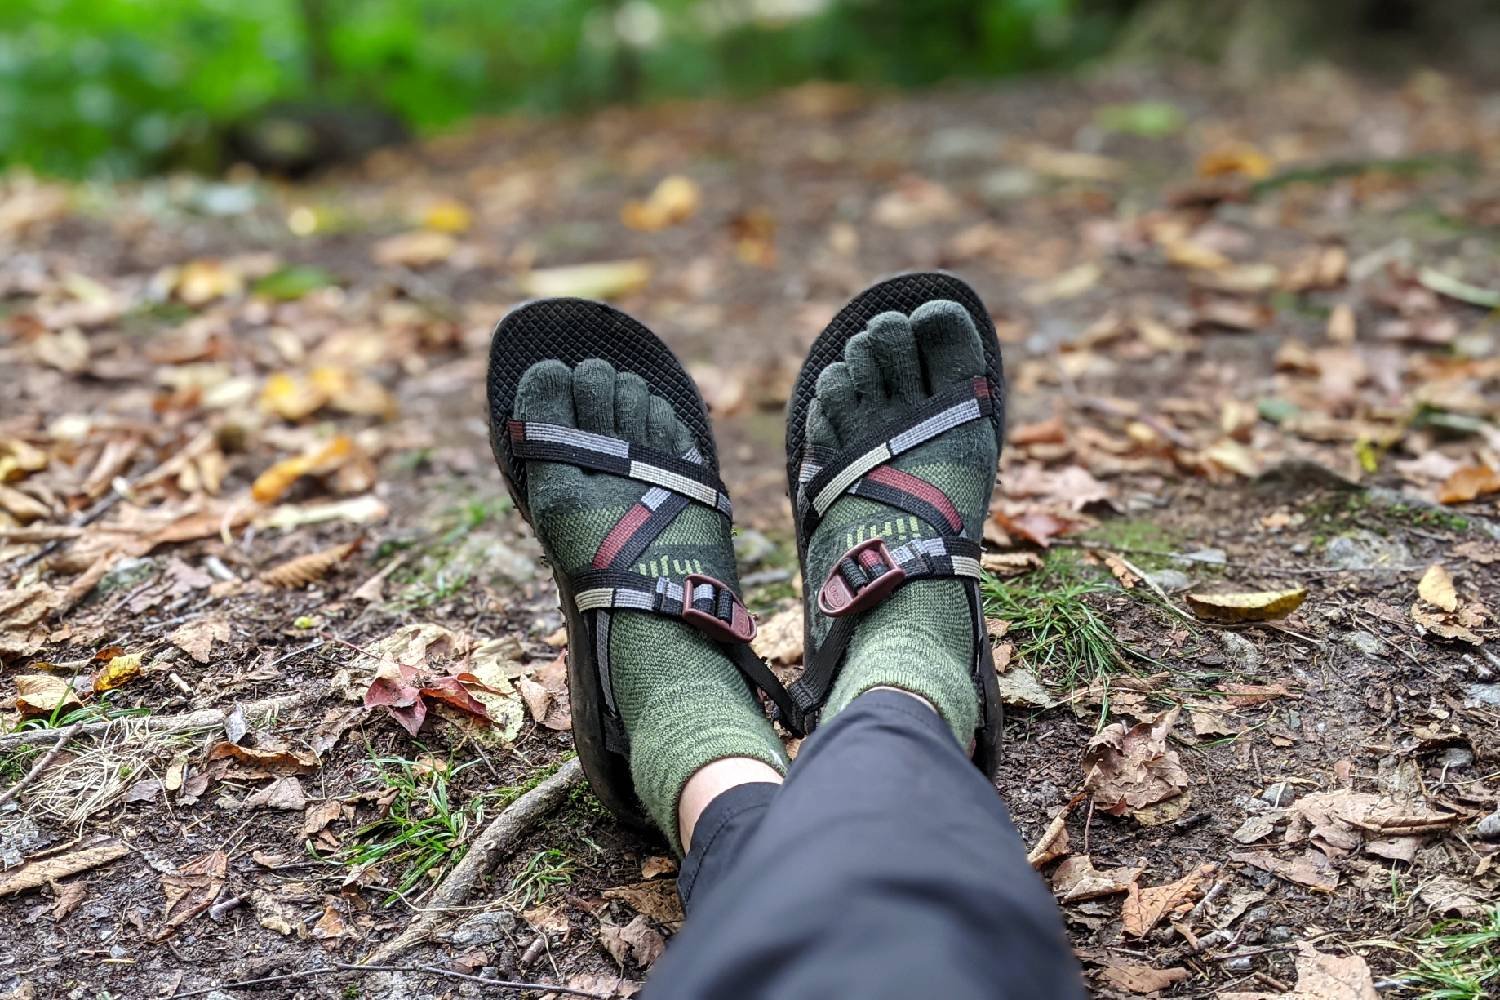 A hiker's feet wearing Injinji toe socks and Chaco Z1 Classic sandals with a blurred forest background